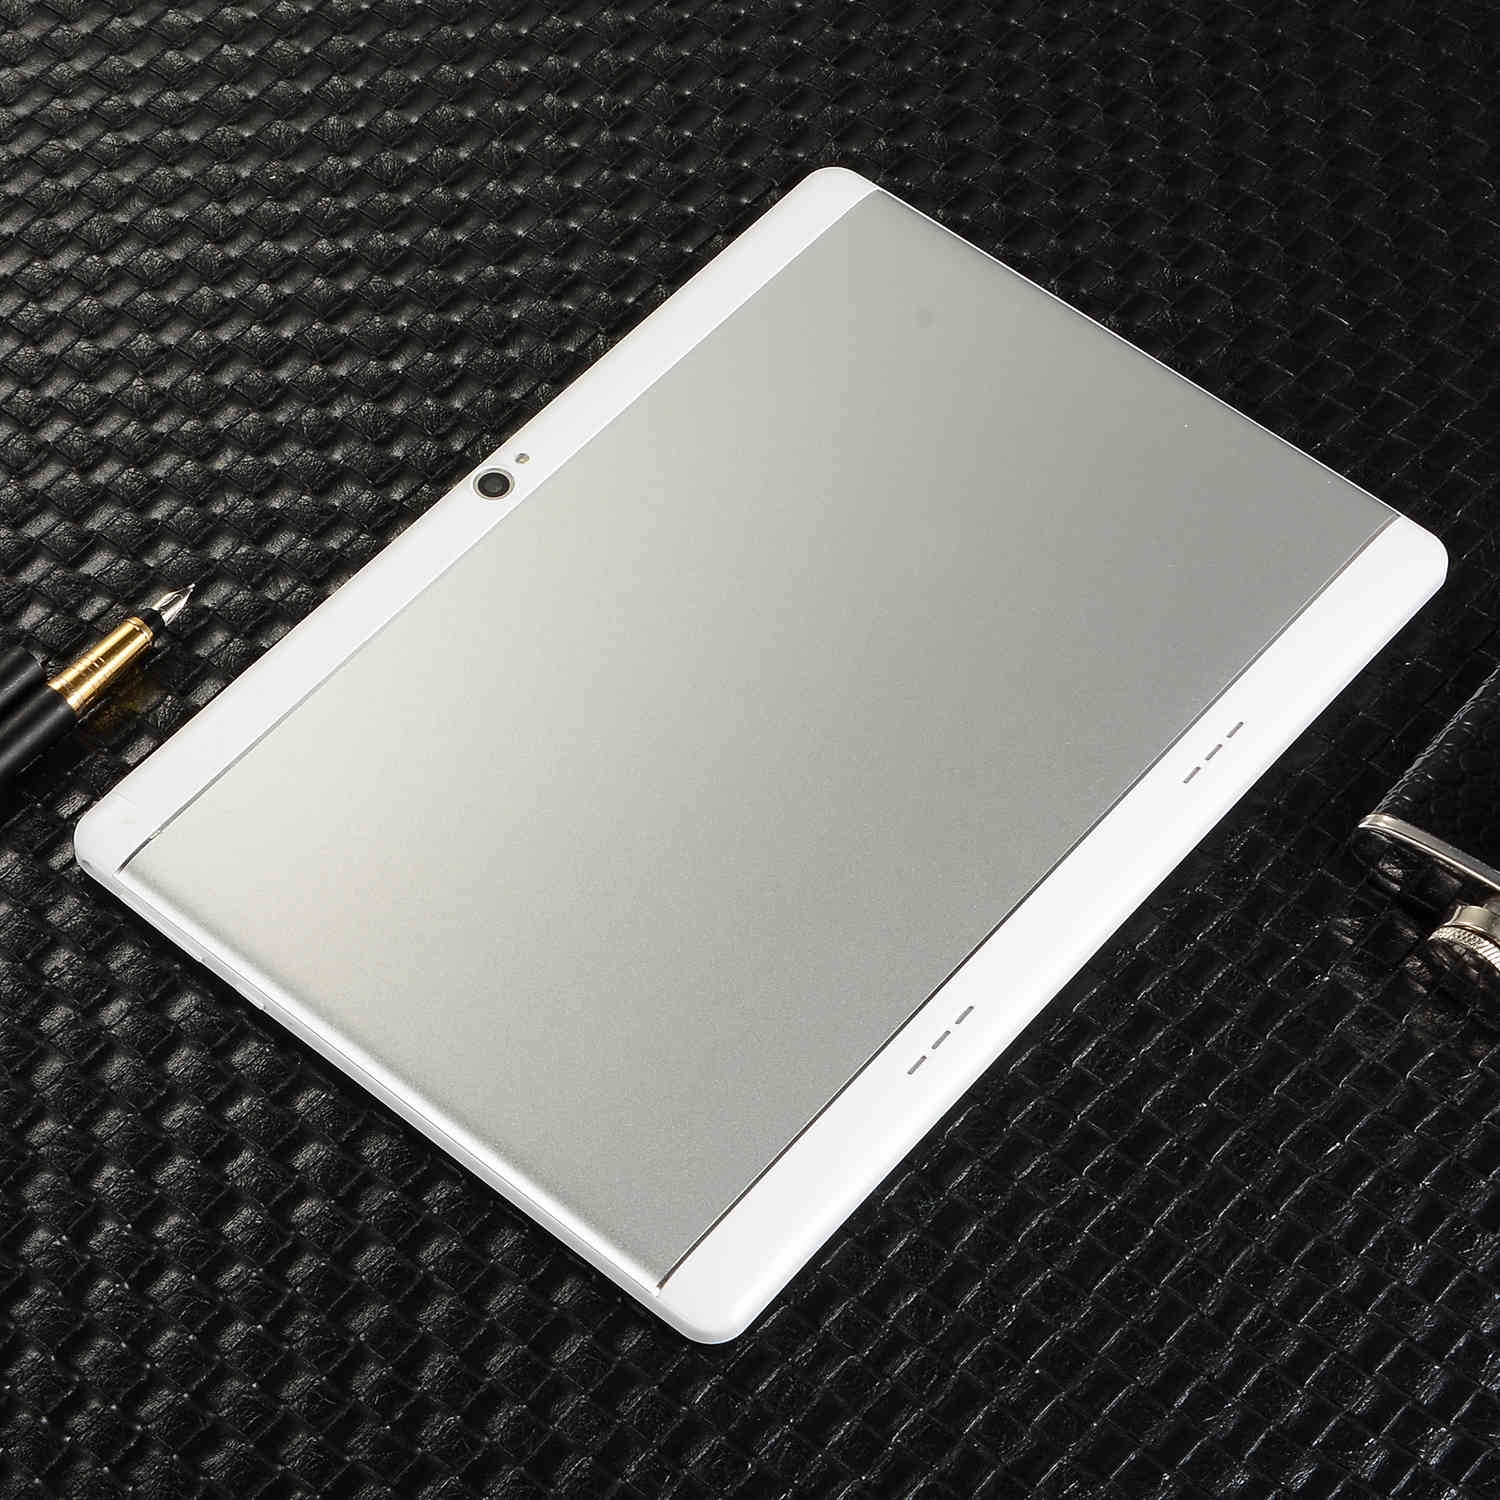 Unicorn HOT SALE 10.1'' 6G+64GB Android 7.0 Tablet PC Octa 8 Core HD